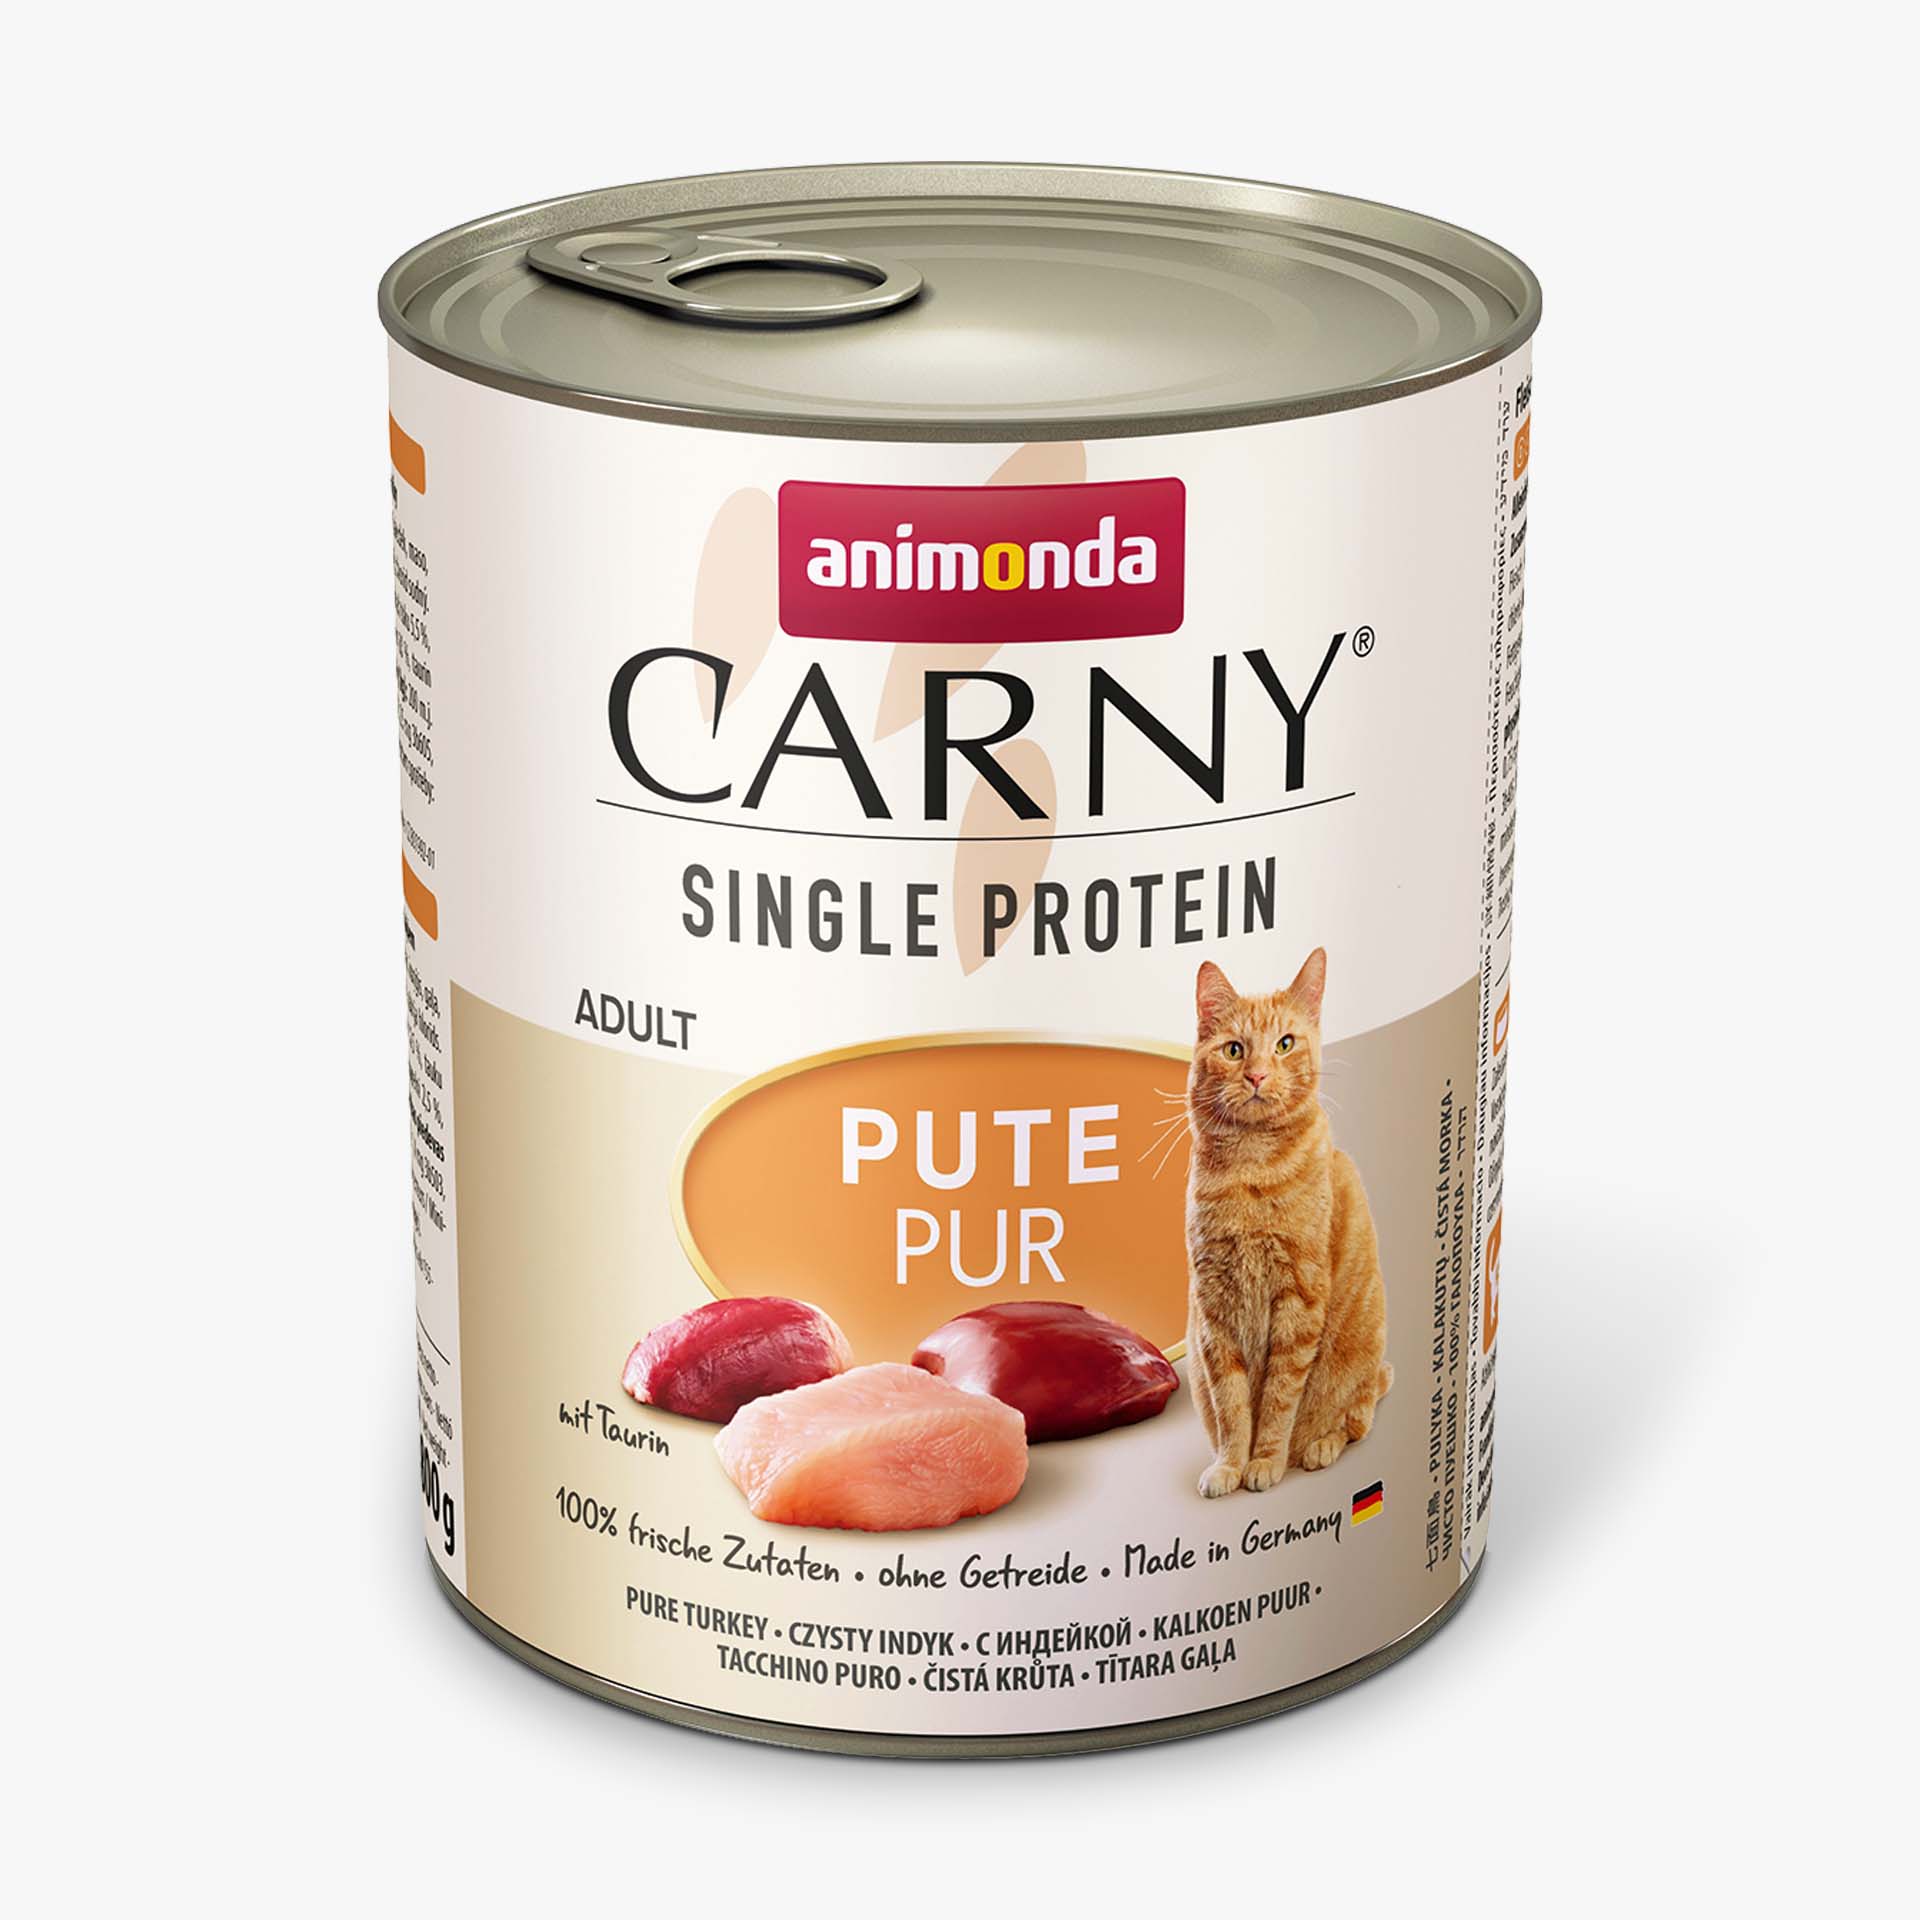 Carny Adult Single Protein Pute pur